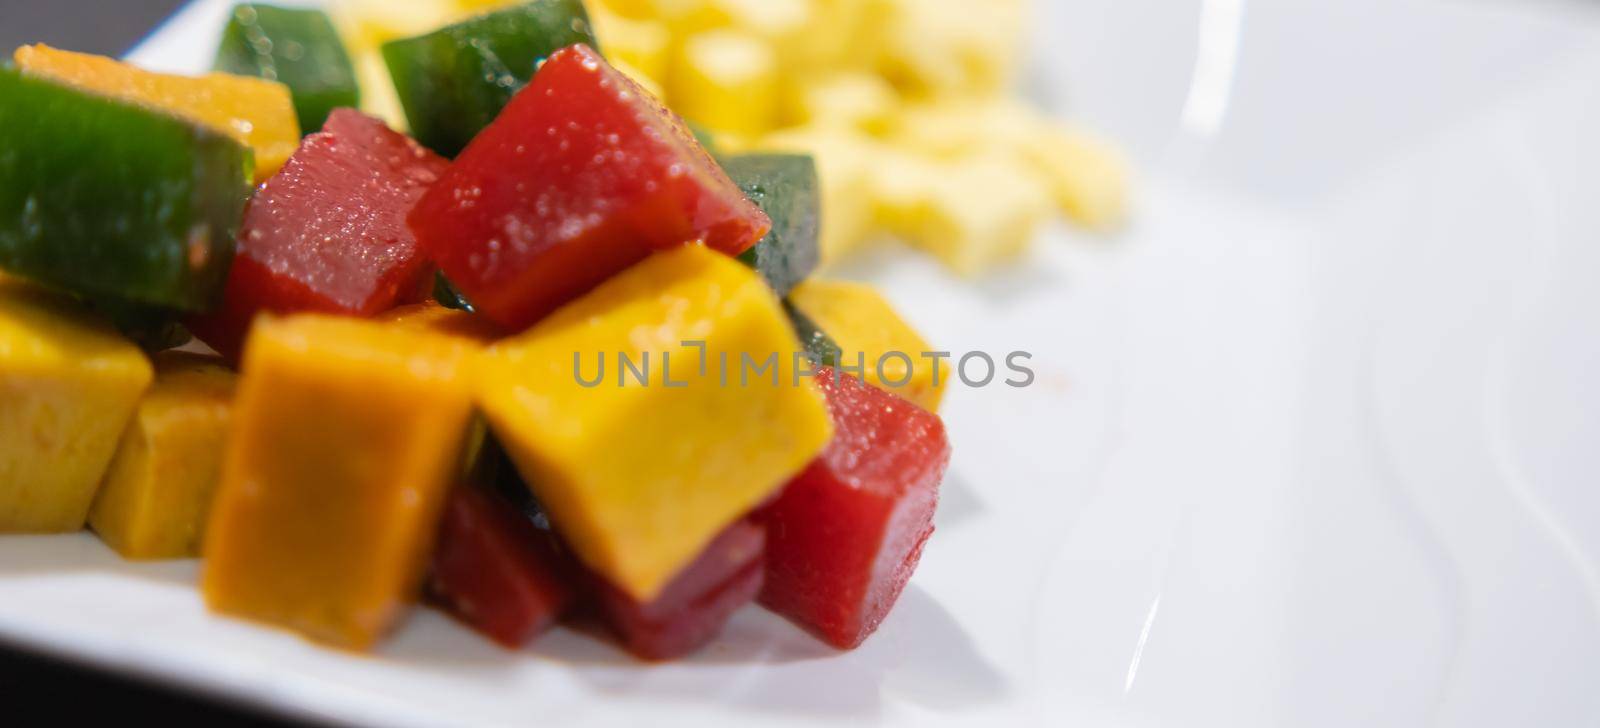 Extreme close-up of red, yellow, and green fruit paste cubes and diced cheese on white plate. Porcelain plate of fresh yellow cheese slices and traditional fruit candy. Sweet and healthy snacks